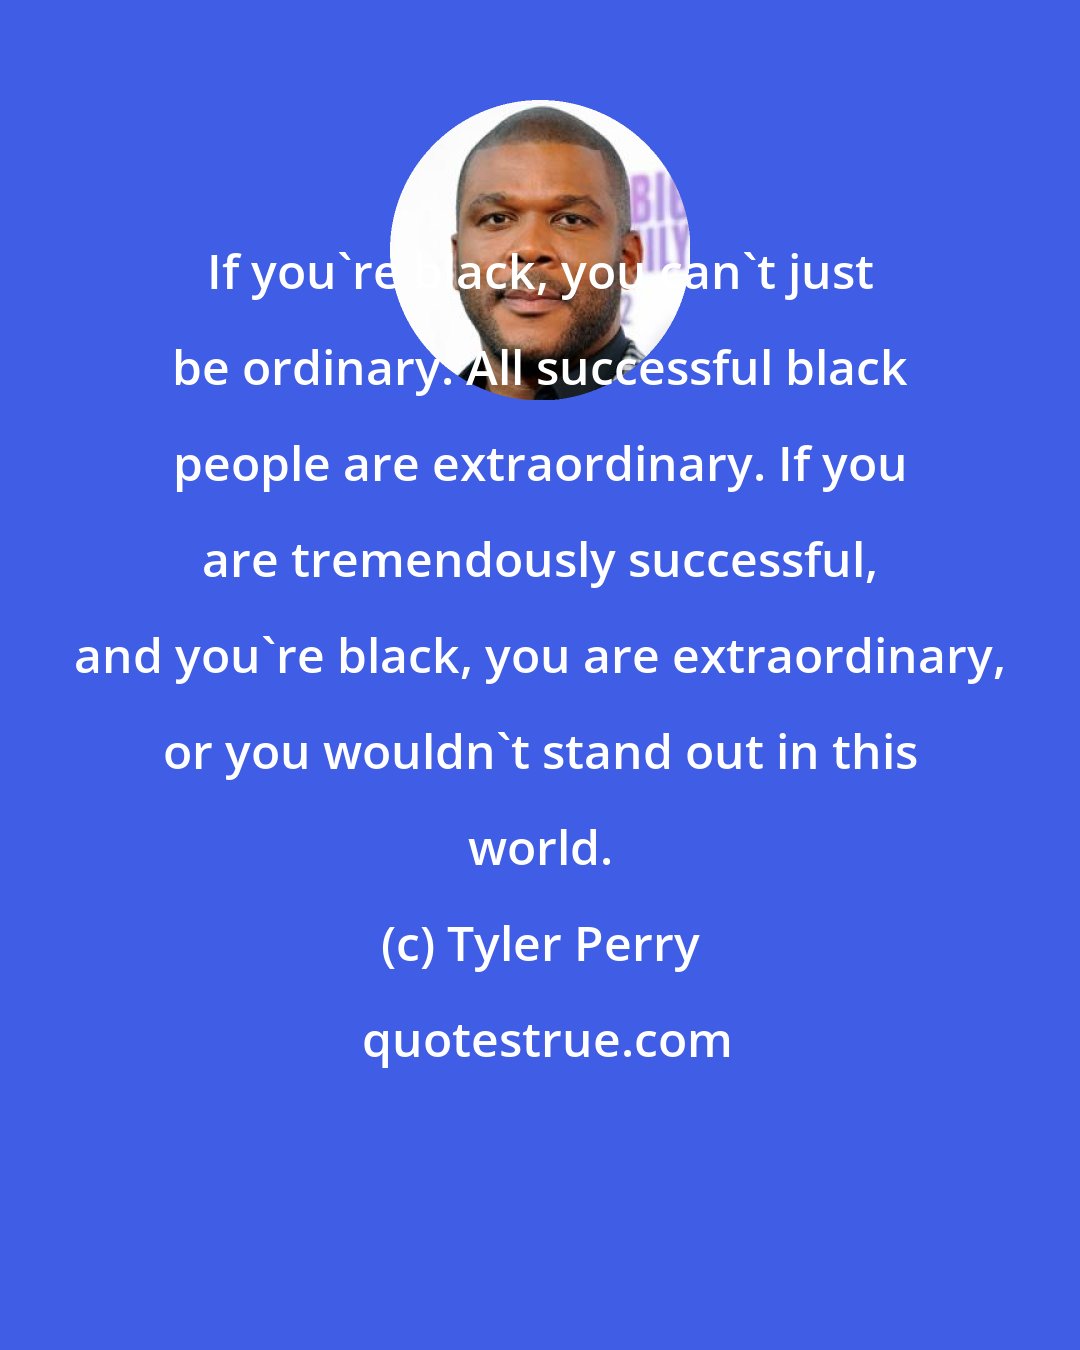 Tyler Perry: If you're black, you can't just be ordinary. All successful black people are extraordinary. If you are tremendously successful, and you're black, you are extraordinary, or you wouldn't stand out in this world.